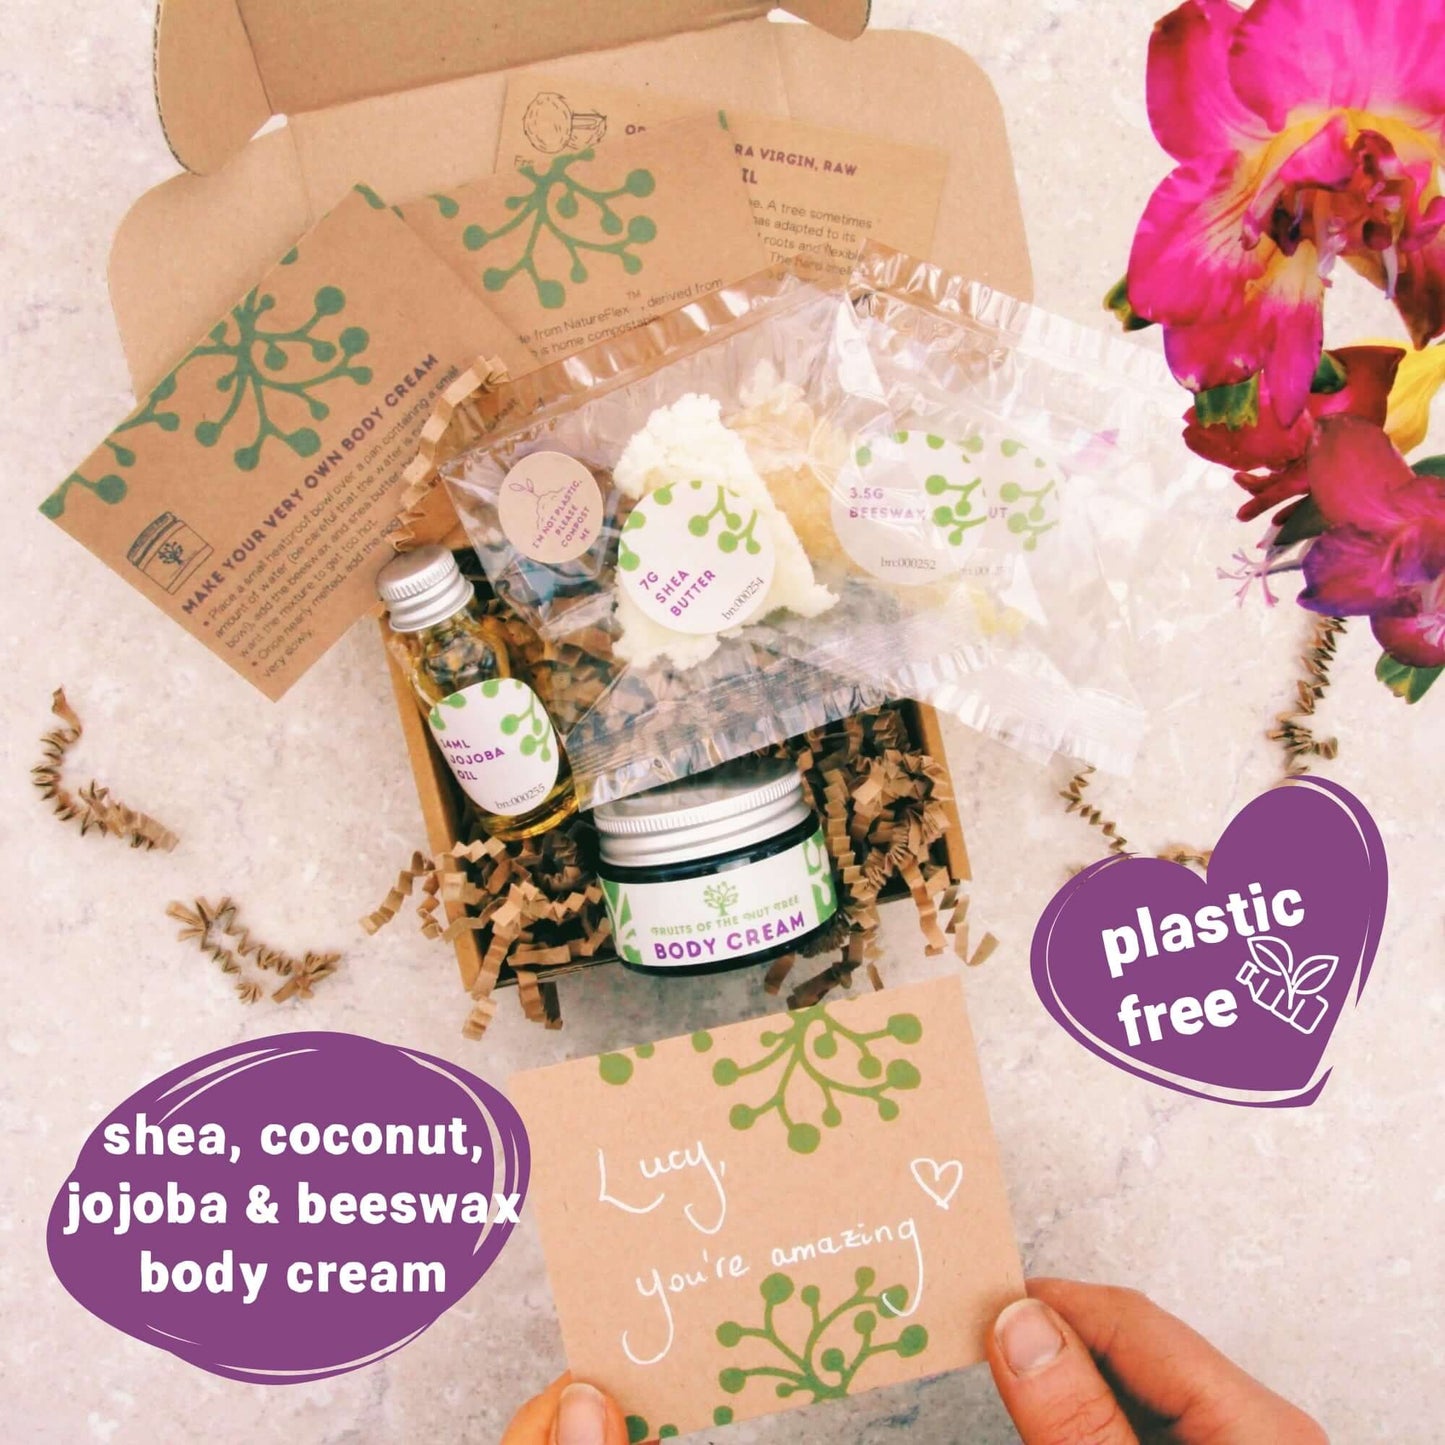 organic ingredients packaged plastic free inside 40th birthday gift box